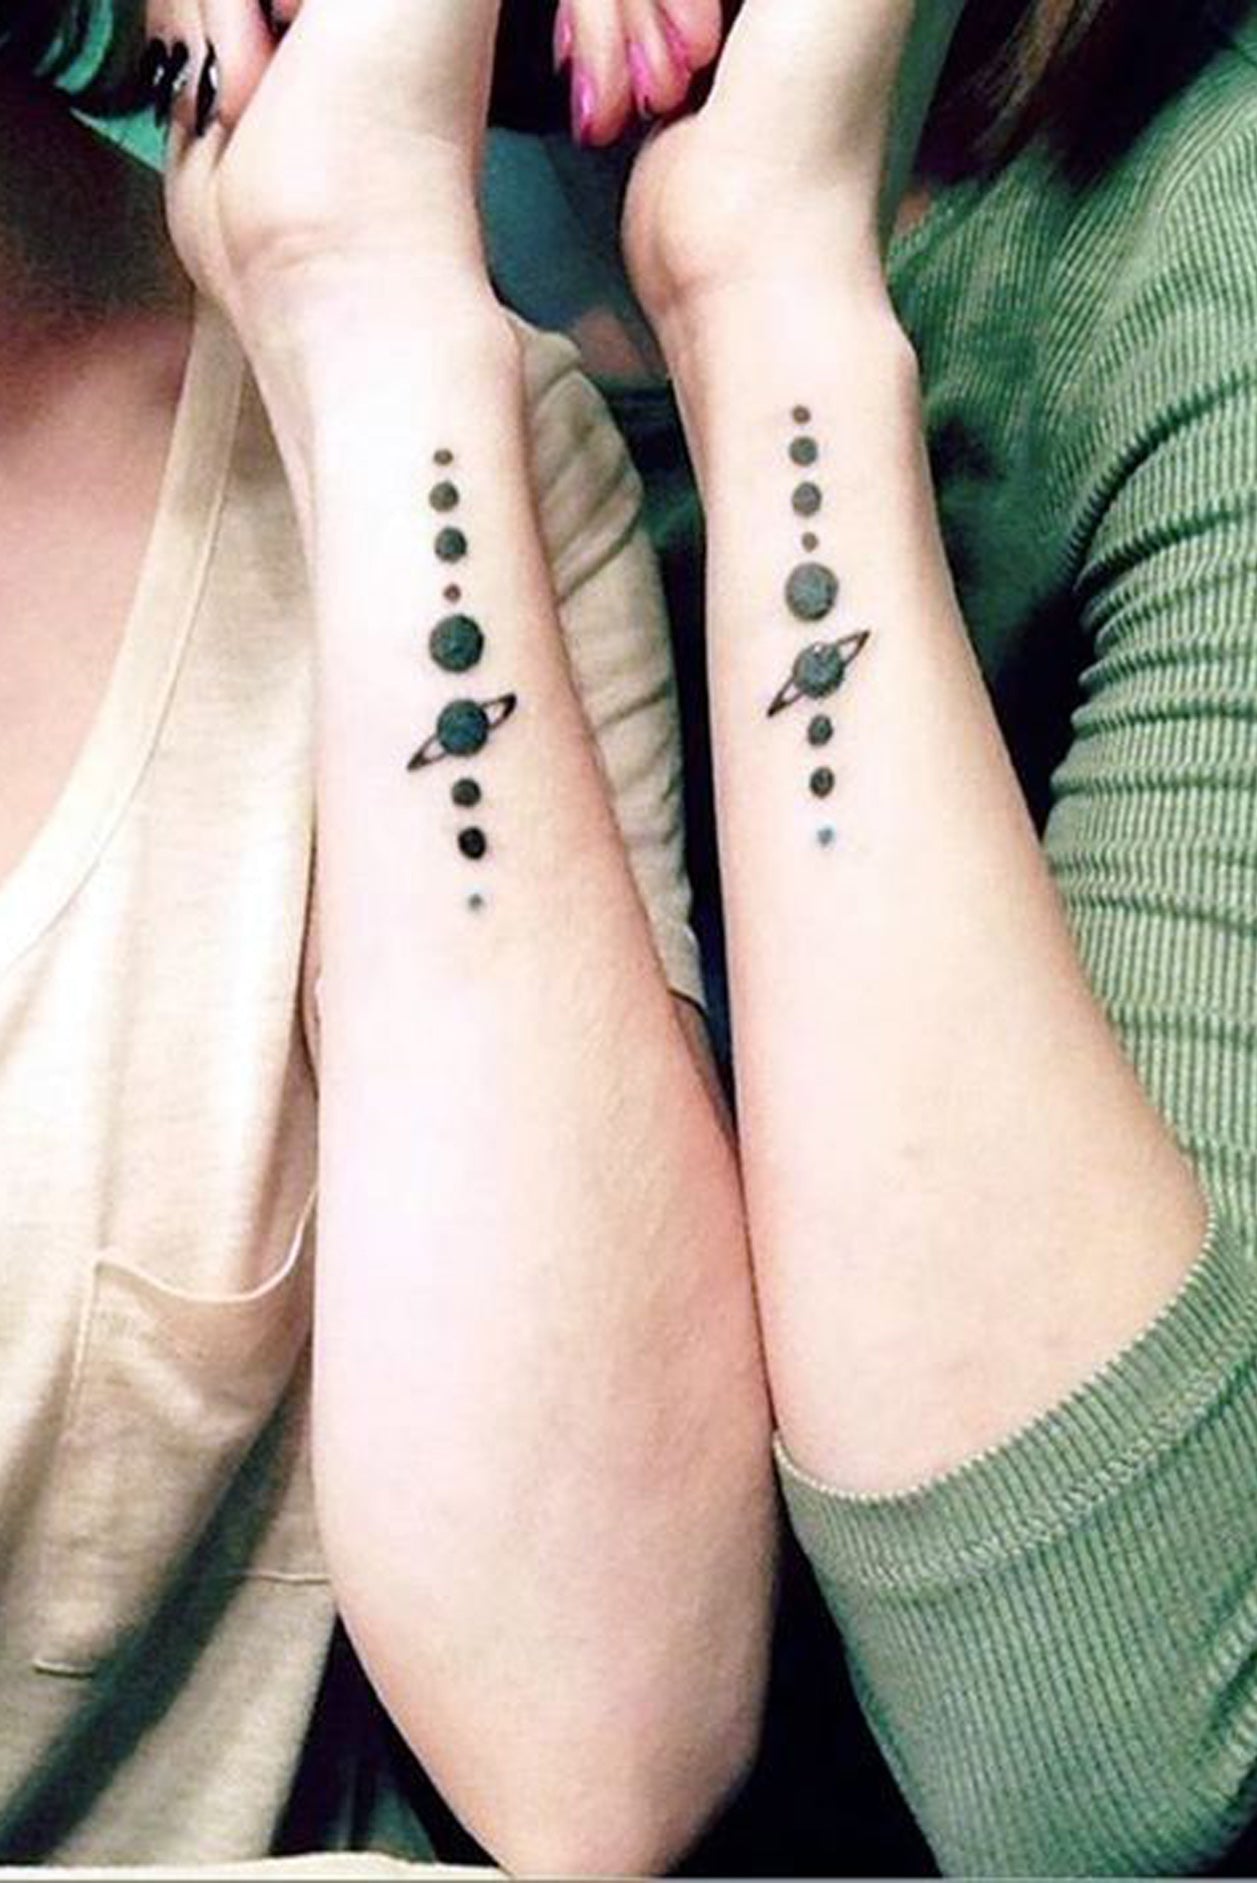 Best friends in tears as their matching butterfly tattoos look like limp  dcks  Daily Star